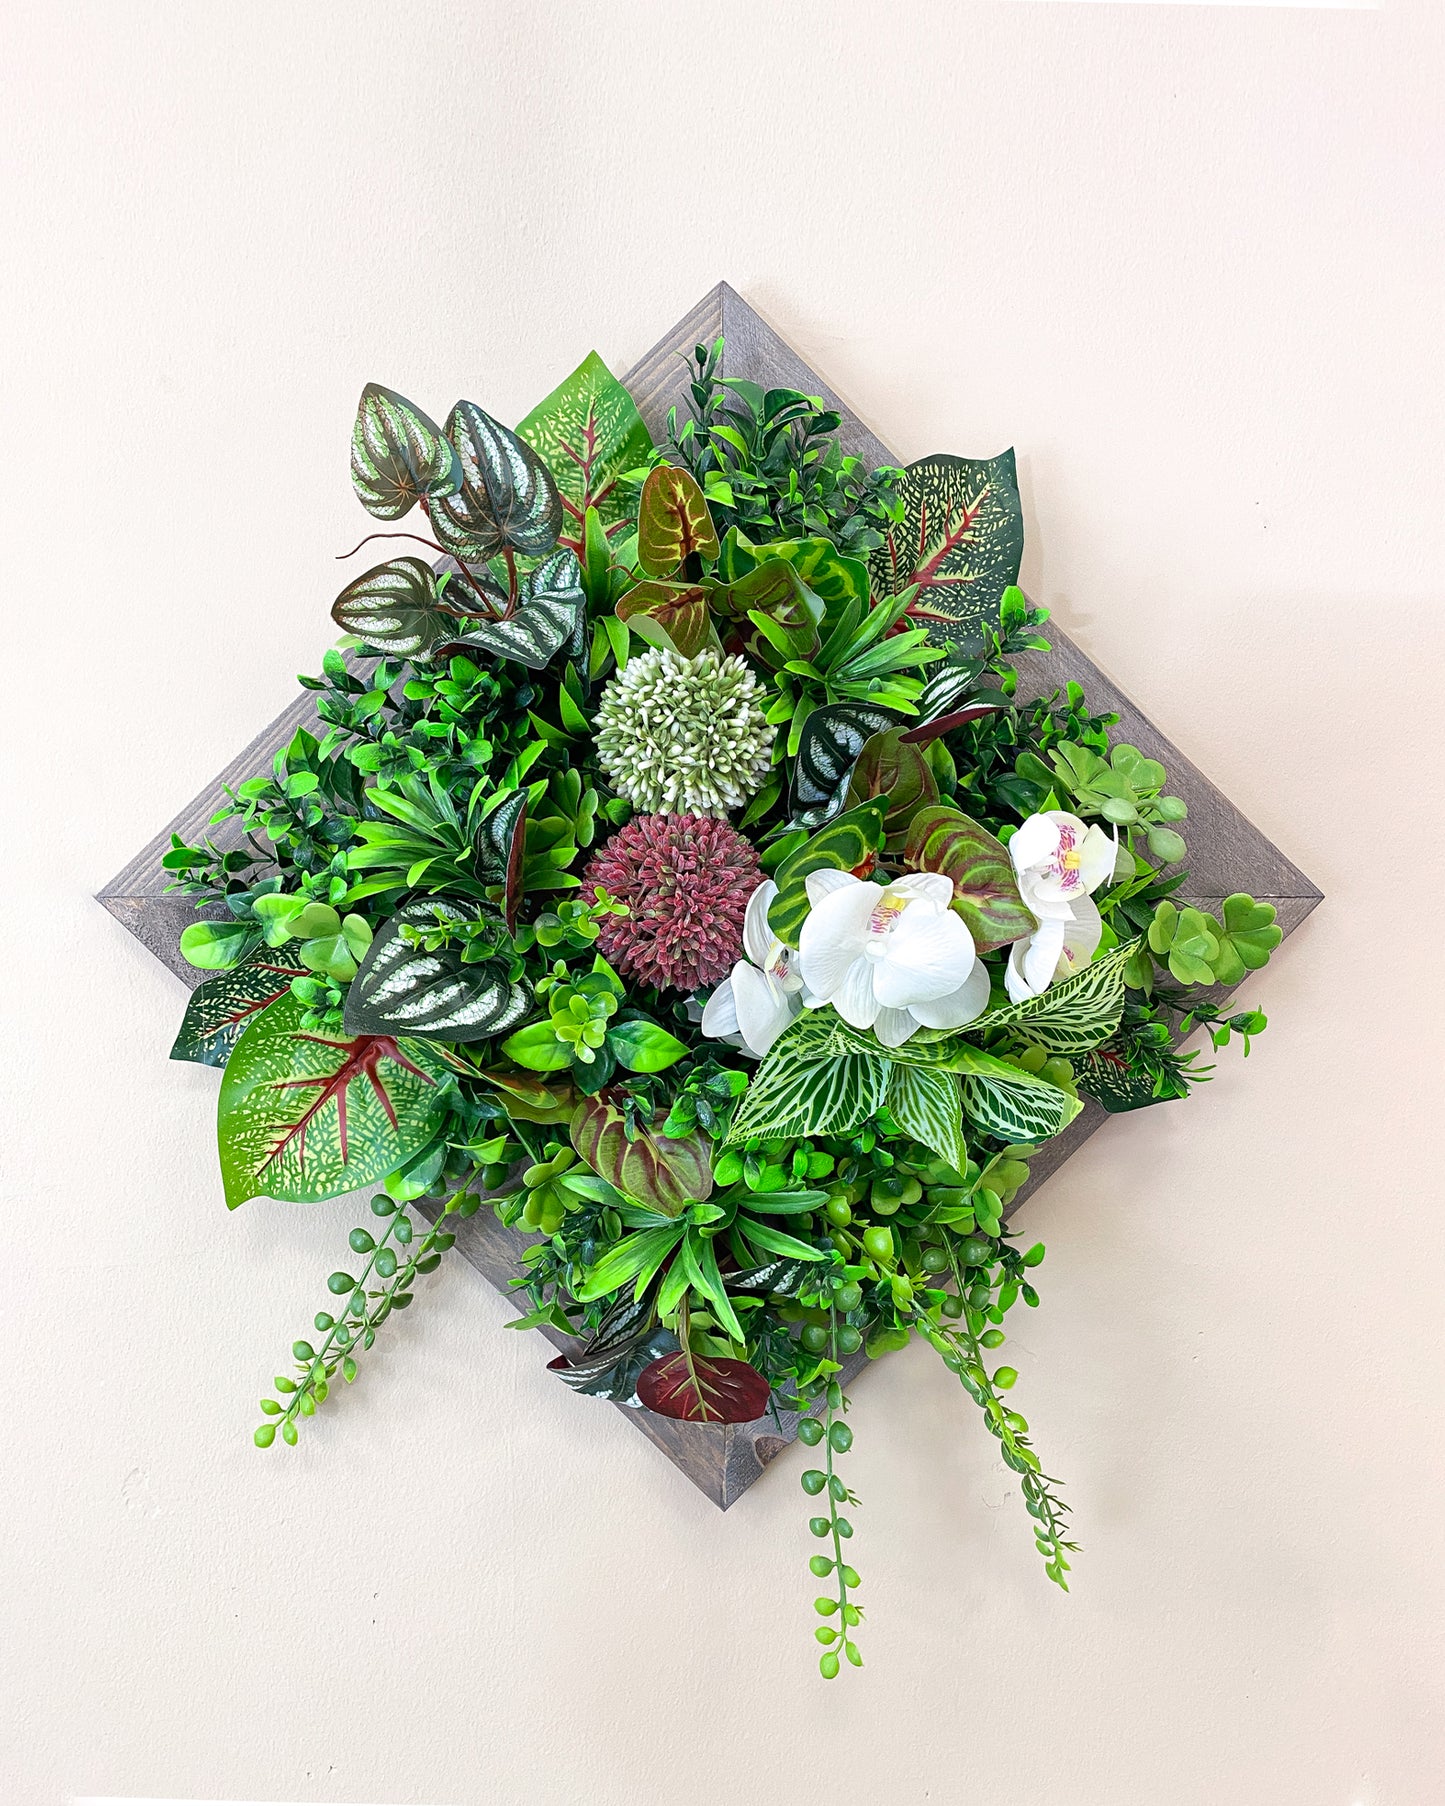 Tiny Frame "BAHIA" made of Realtouch artificial plants with a spruce frame